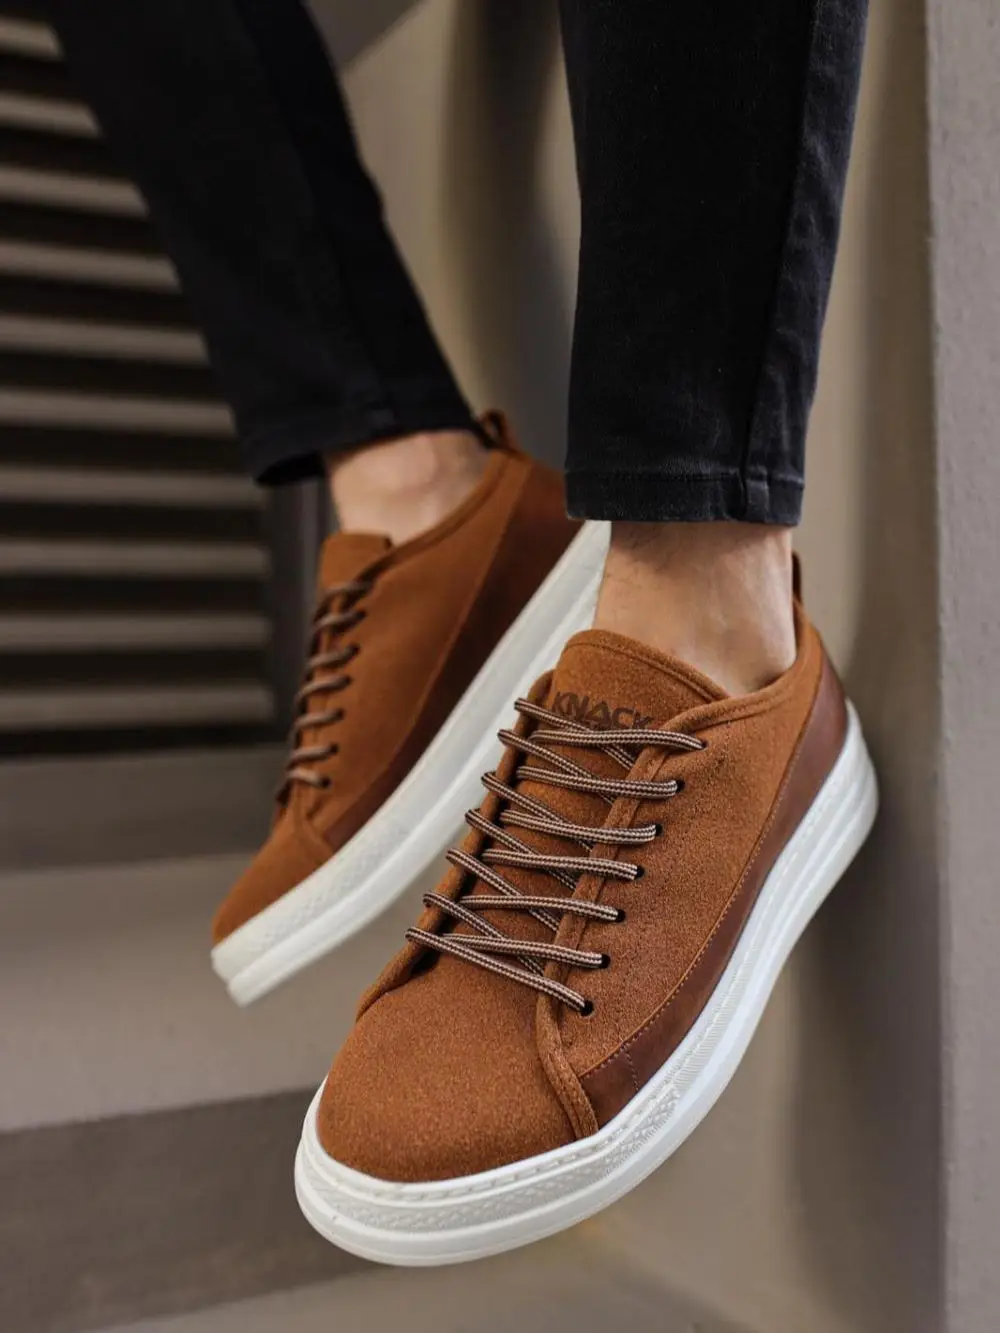 

Knack 010 Male Sneakers Shoes Young Fashion Orthopedic Outsole Lace-Up Casual Walking Spring And Autumn Tan (Non-Leather)